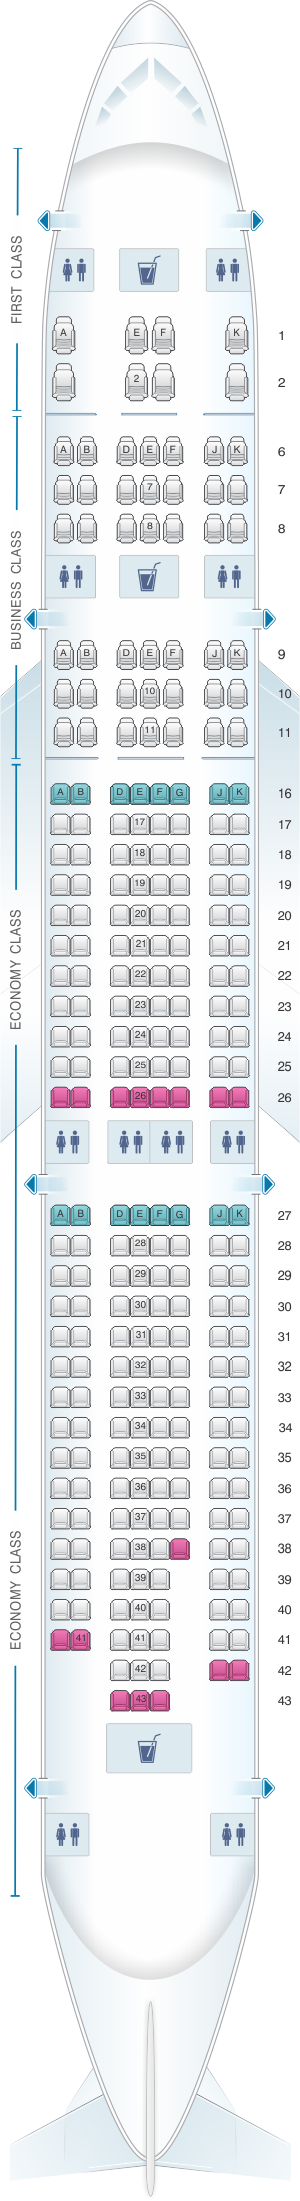 Seat map for Emirates Airbus A340 300